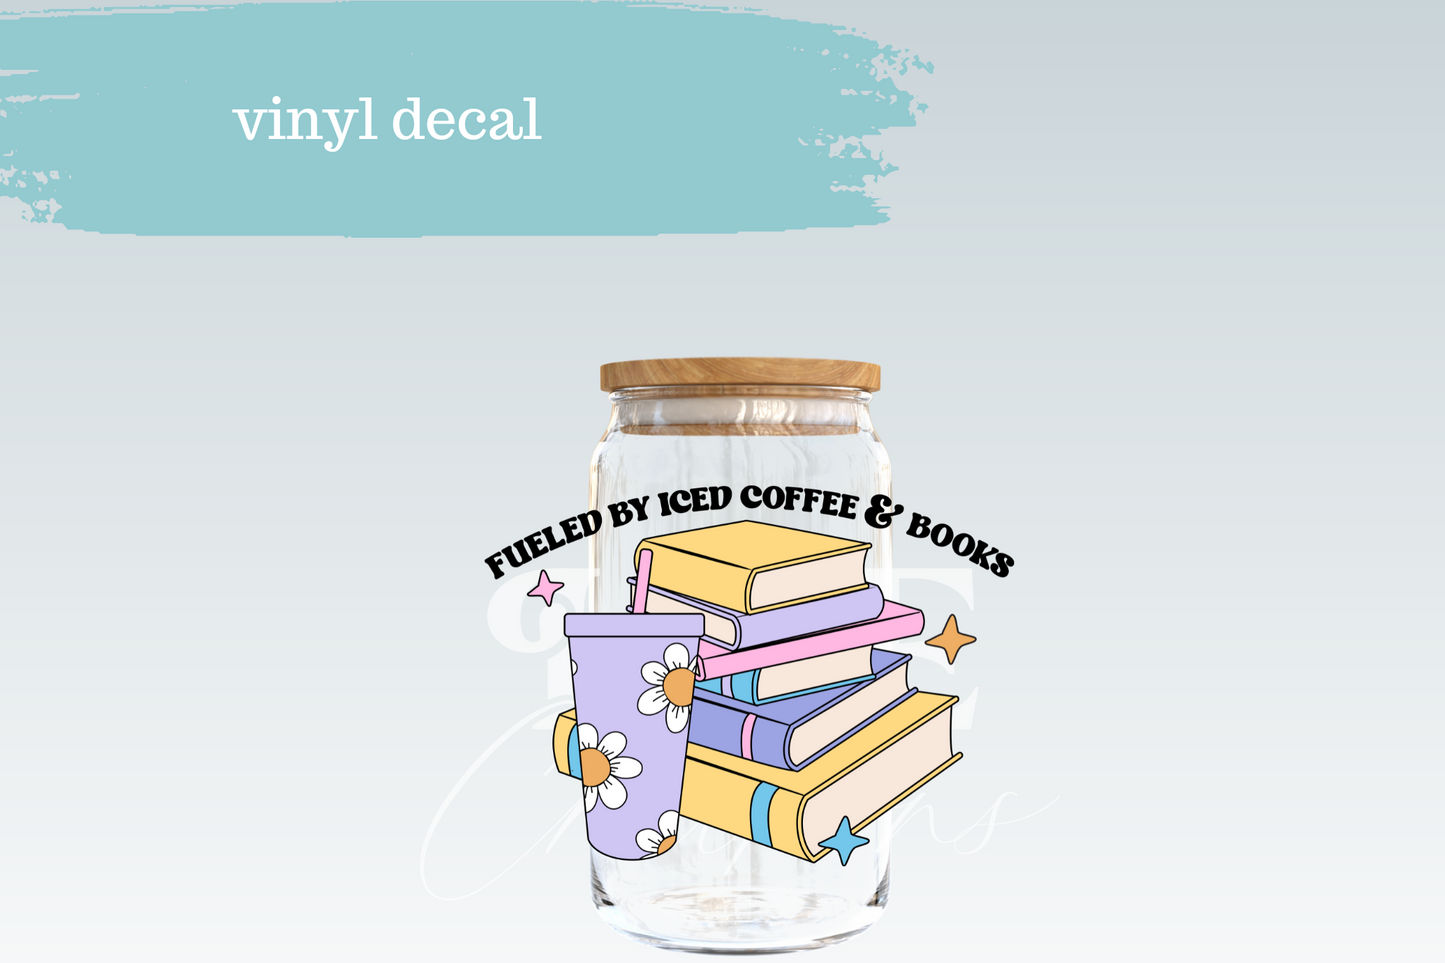 Fueled by Ice Coffee & Books | Vinyl Decal